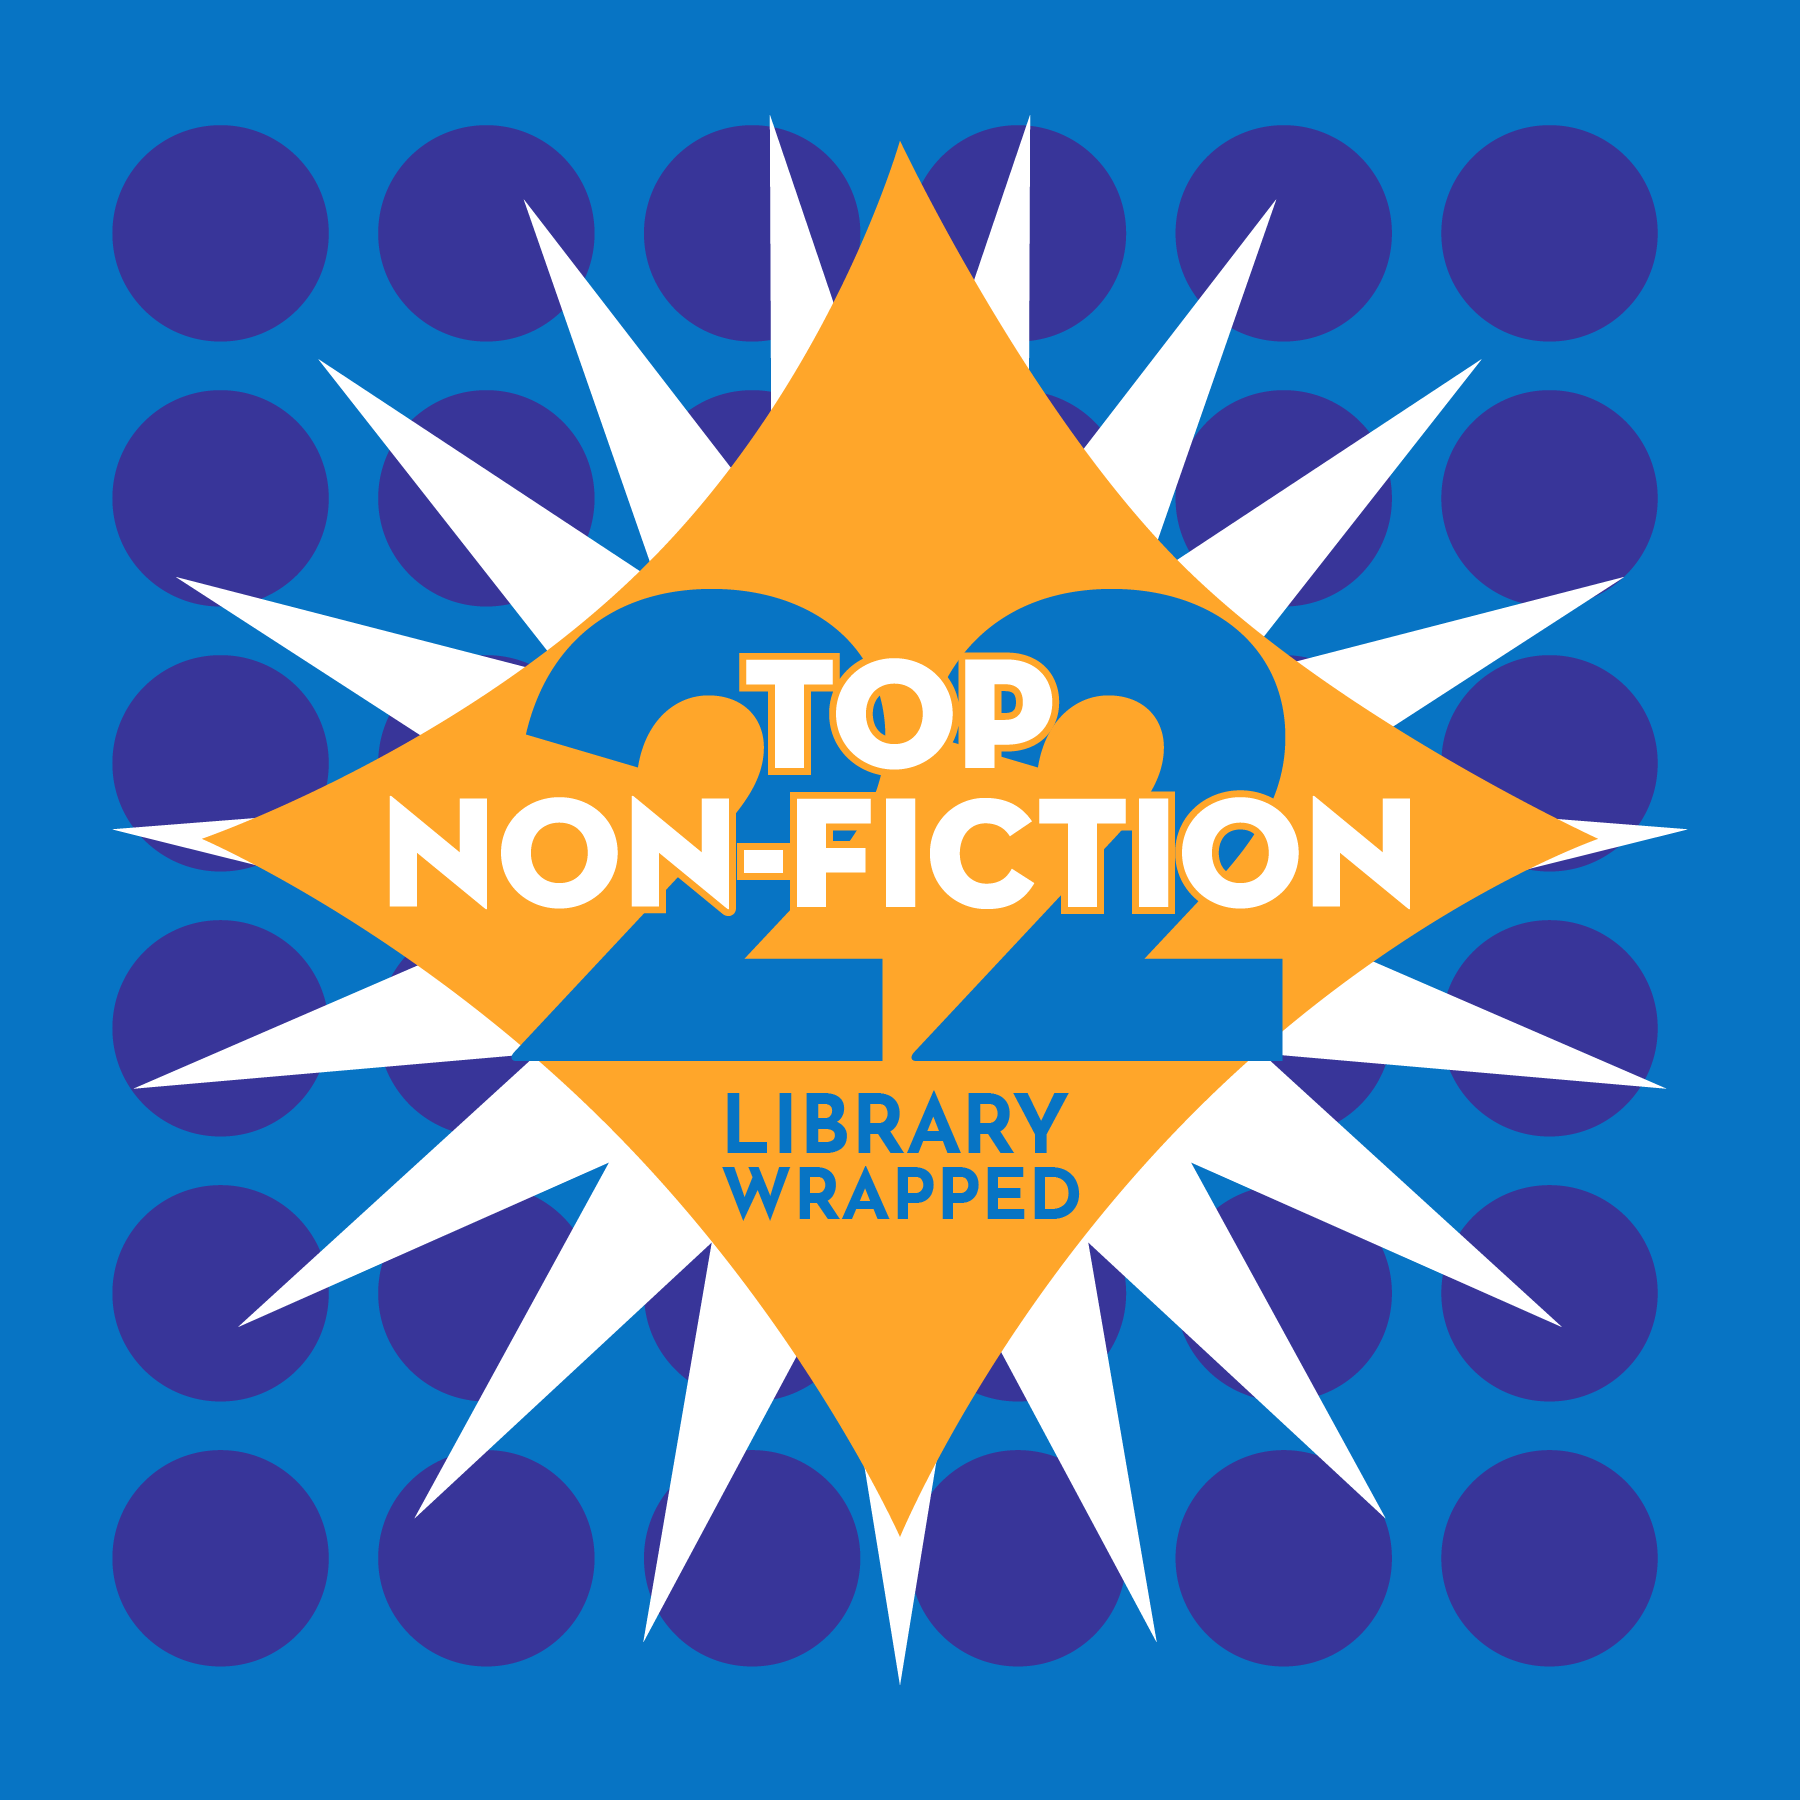 A graphic says 22 Library Wrapped Top Nonfiction over a blue background.